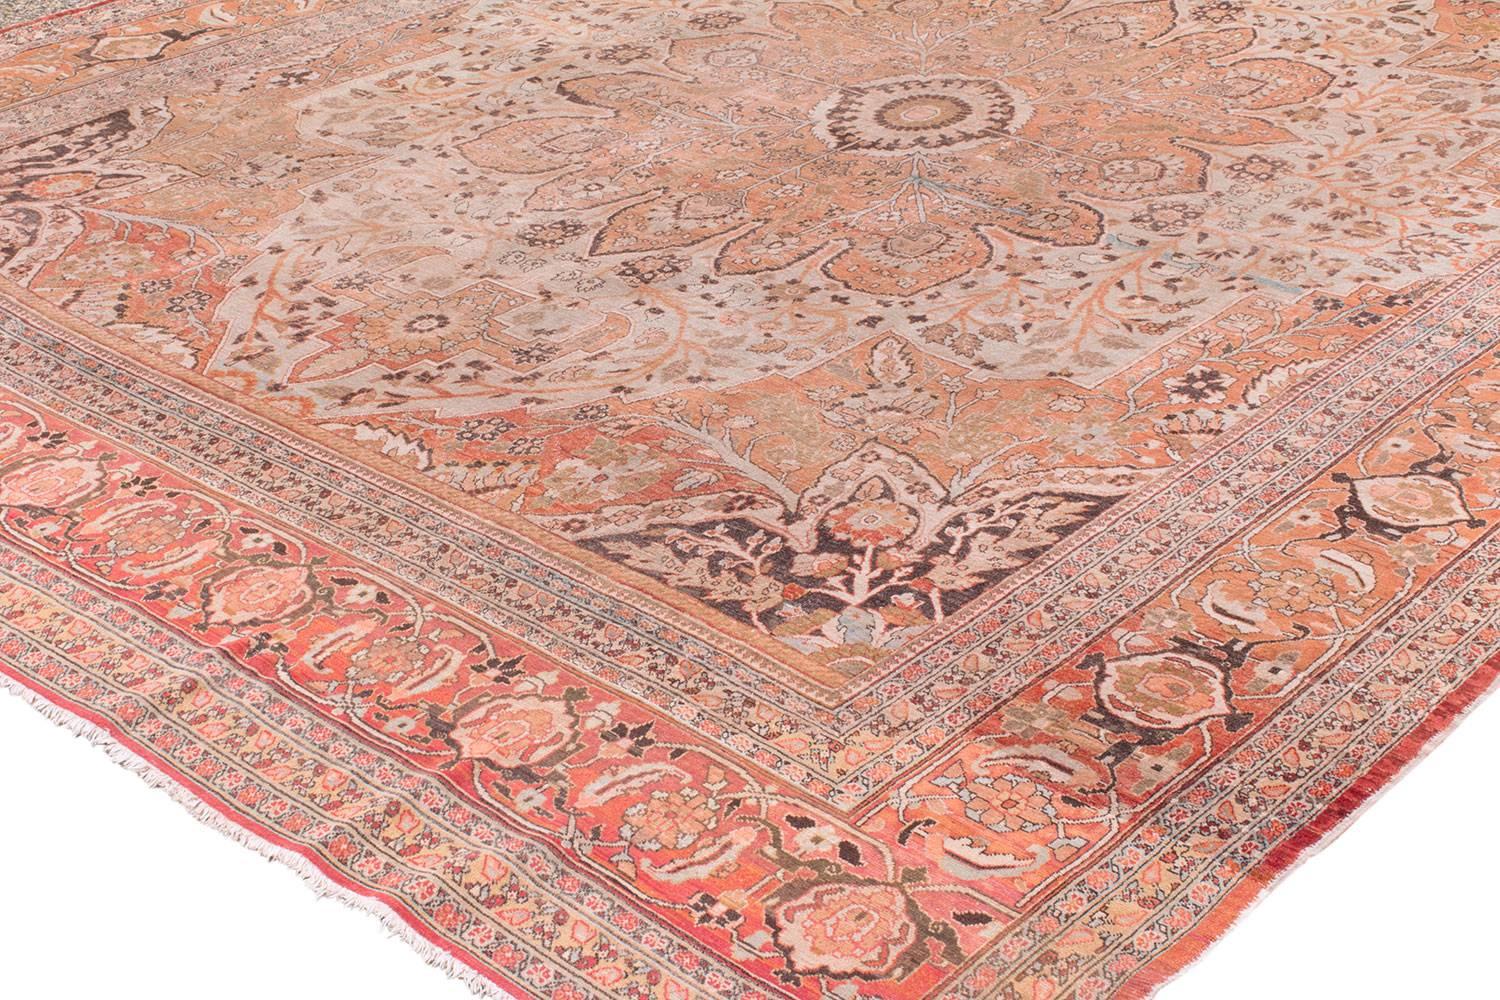 This Tabriz carpet has very nice design elements, The branches and leaves look like they are swaying in the breeze. The salmon pink colors are so soft and calming. There are little touches of very light blue that accentuate the rug perfectly. One of